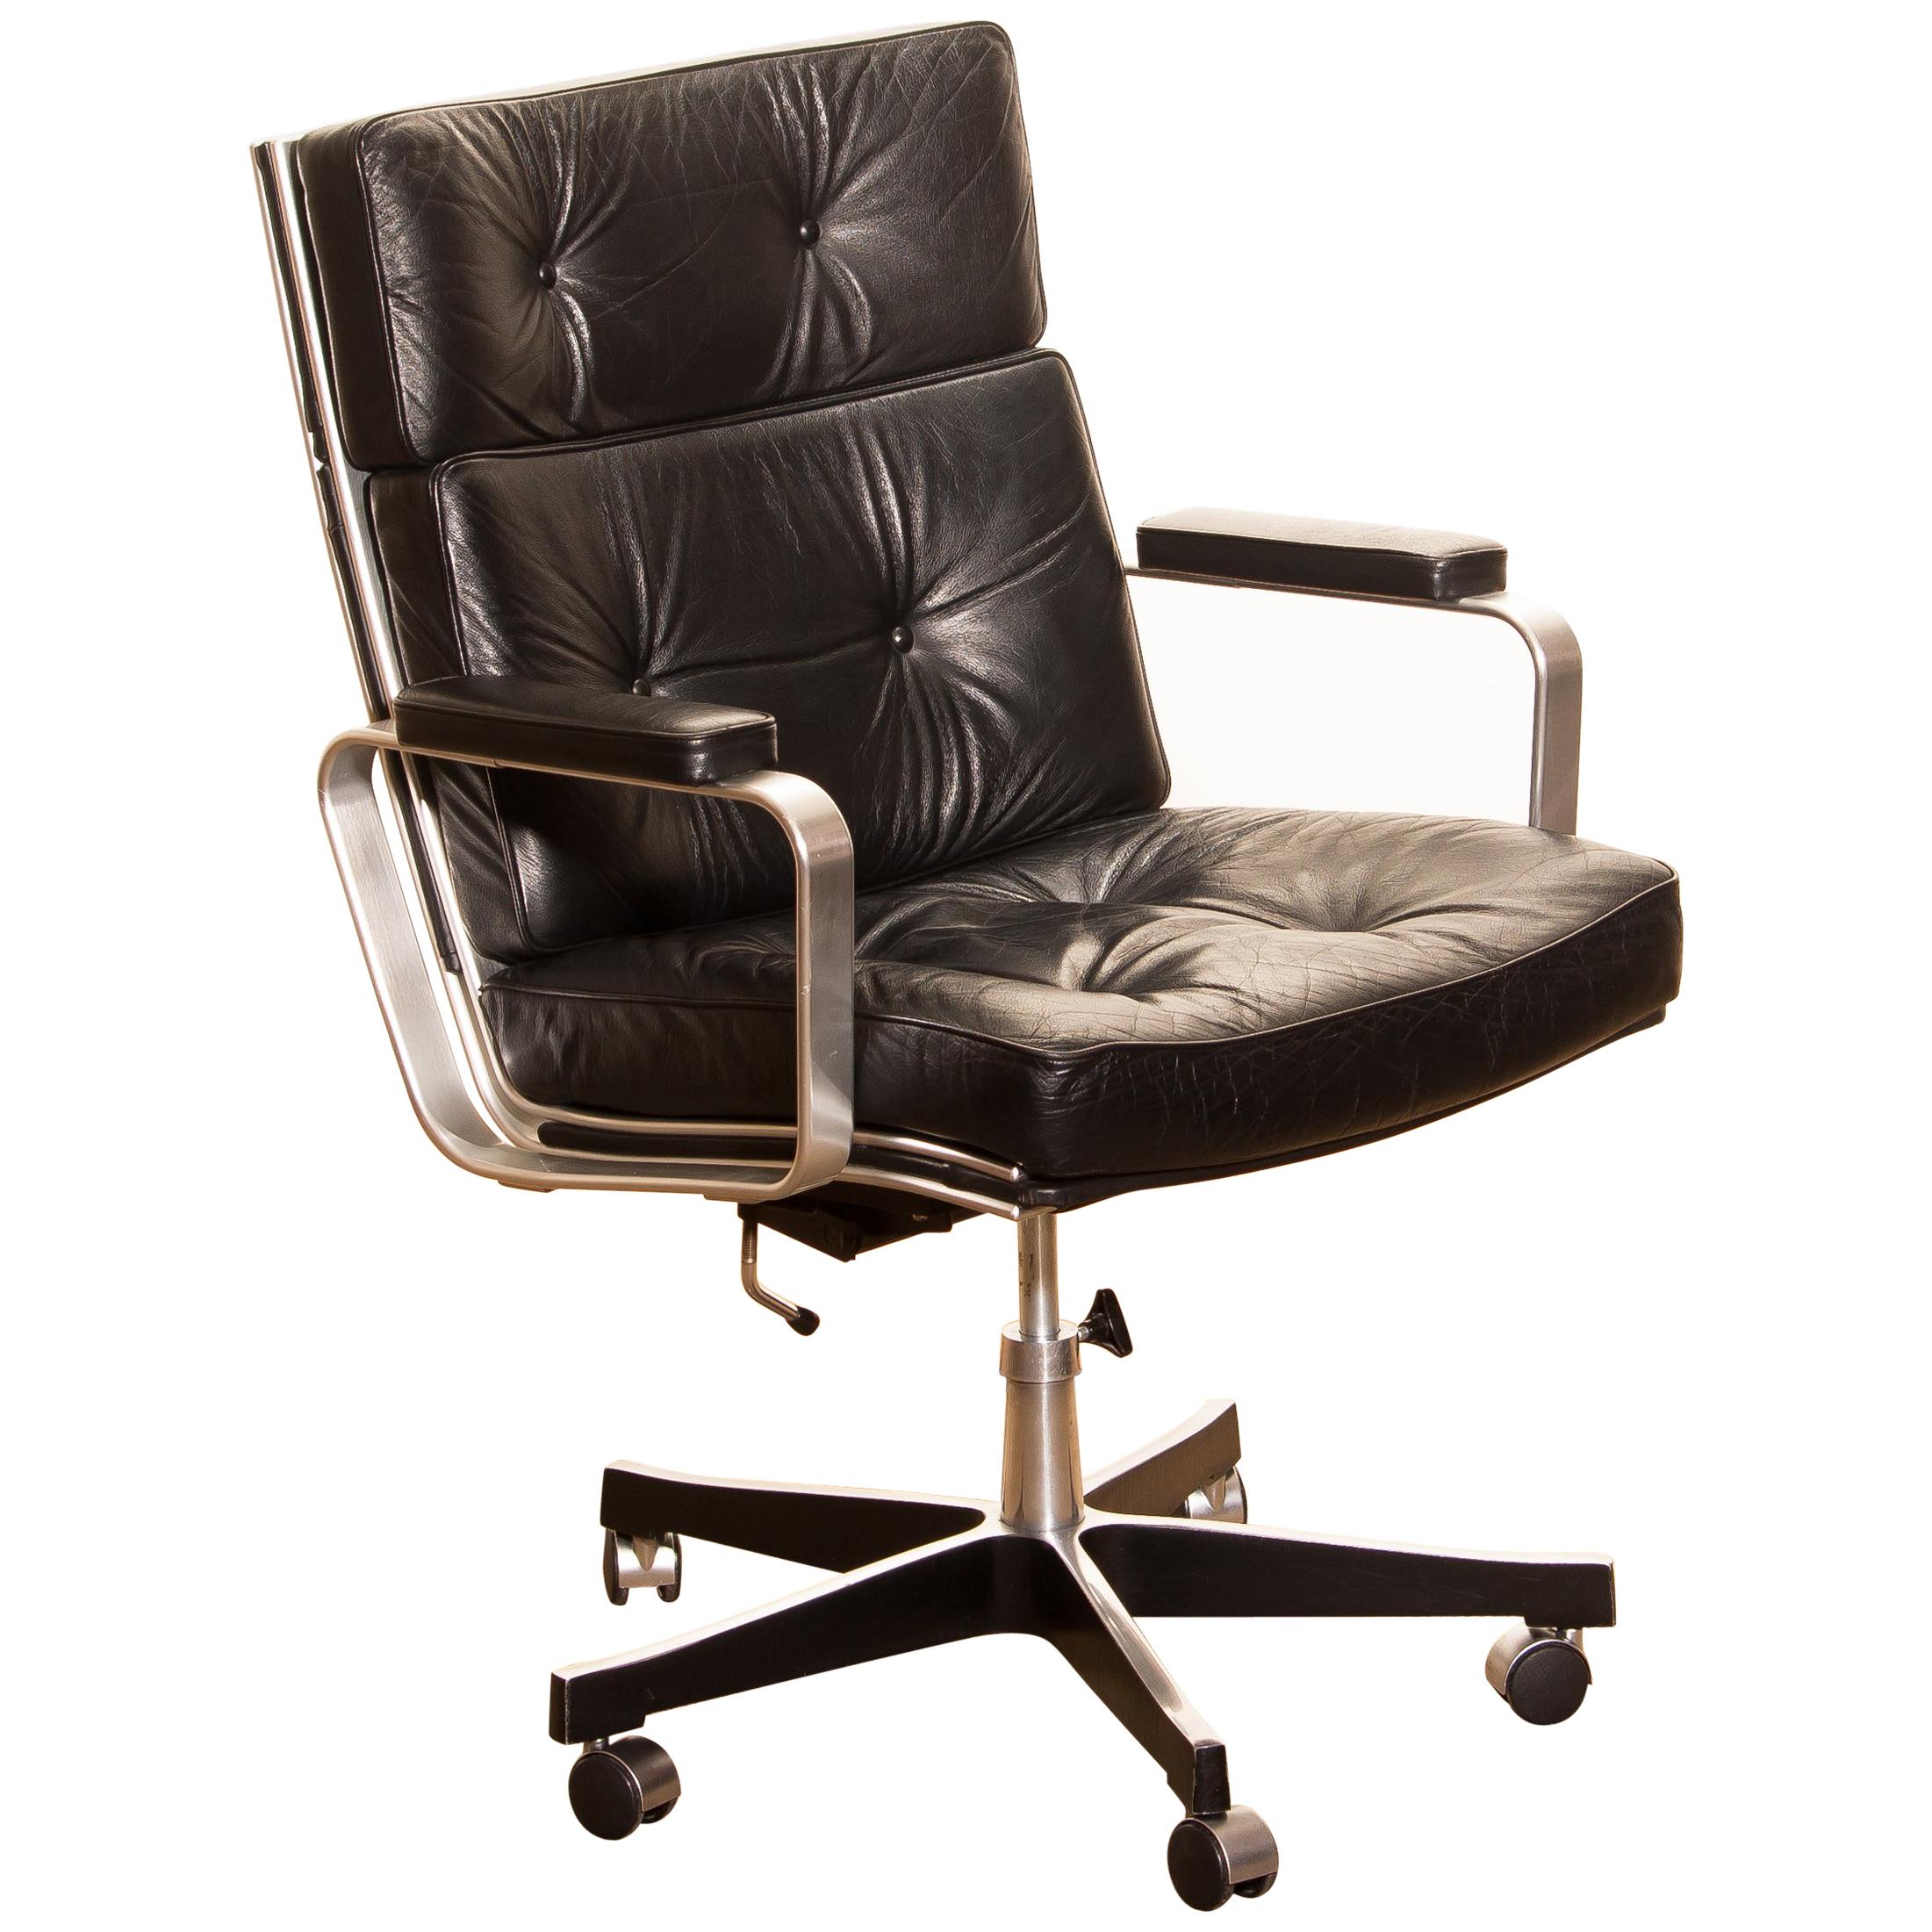 Beautiful adjustable office chair designed by Karl Erik Ekselius for JOC Design.
The nice thick solid black leather with an aluminium frame on wheels all in good condition.
The chair is extremely comfortable and newly filed.
Period: